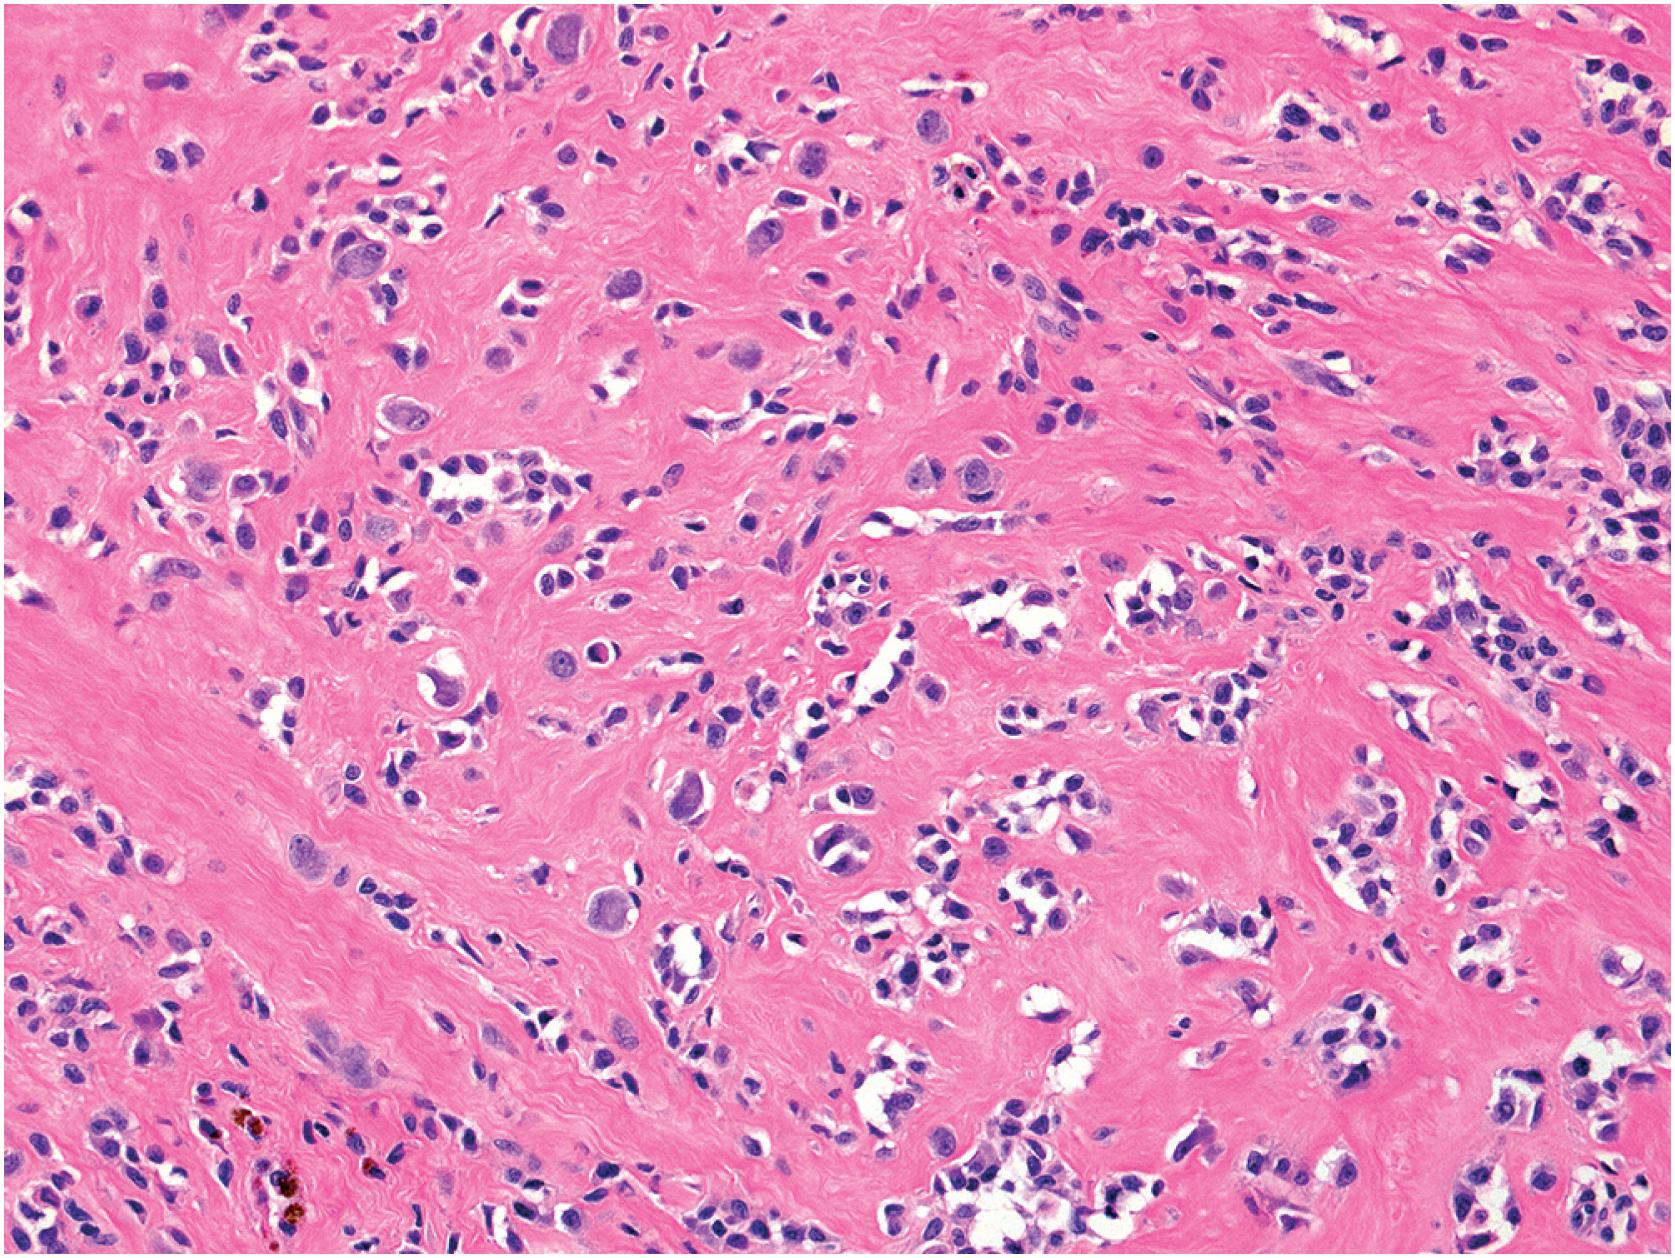 Fig. 13.15, Localized tenosynovial giant cell tumor. This tumor is largely hyalinized, with scattered nests of mononuclear cells and scarce giant cells.